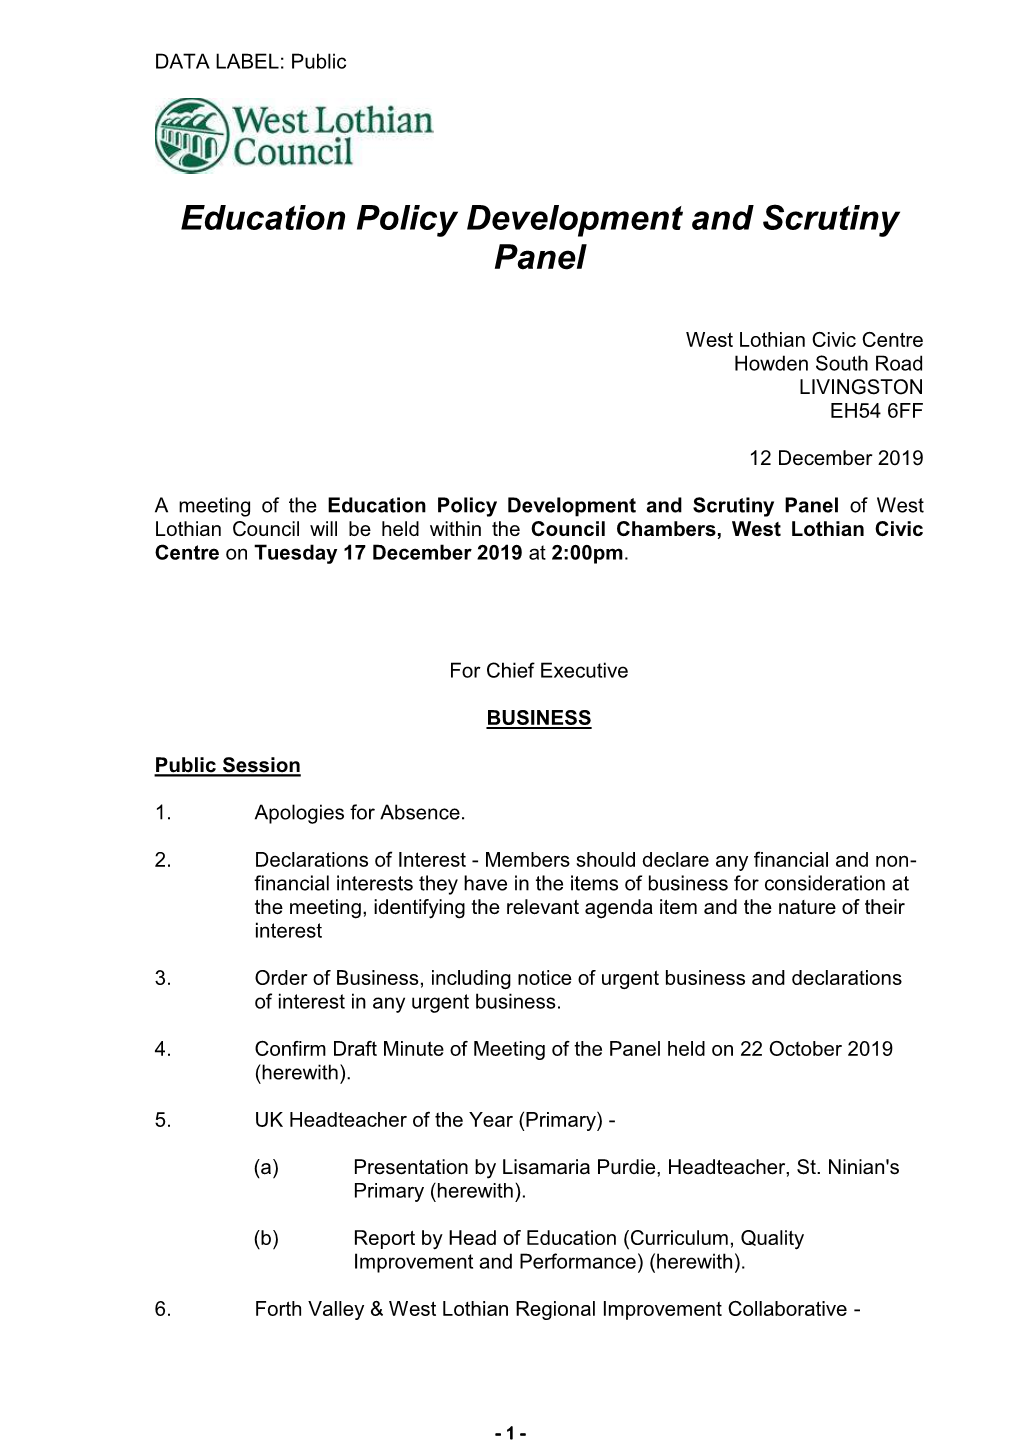 Education Policy Development and Scrutiny Panel